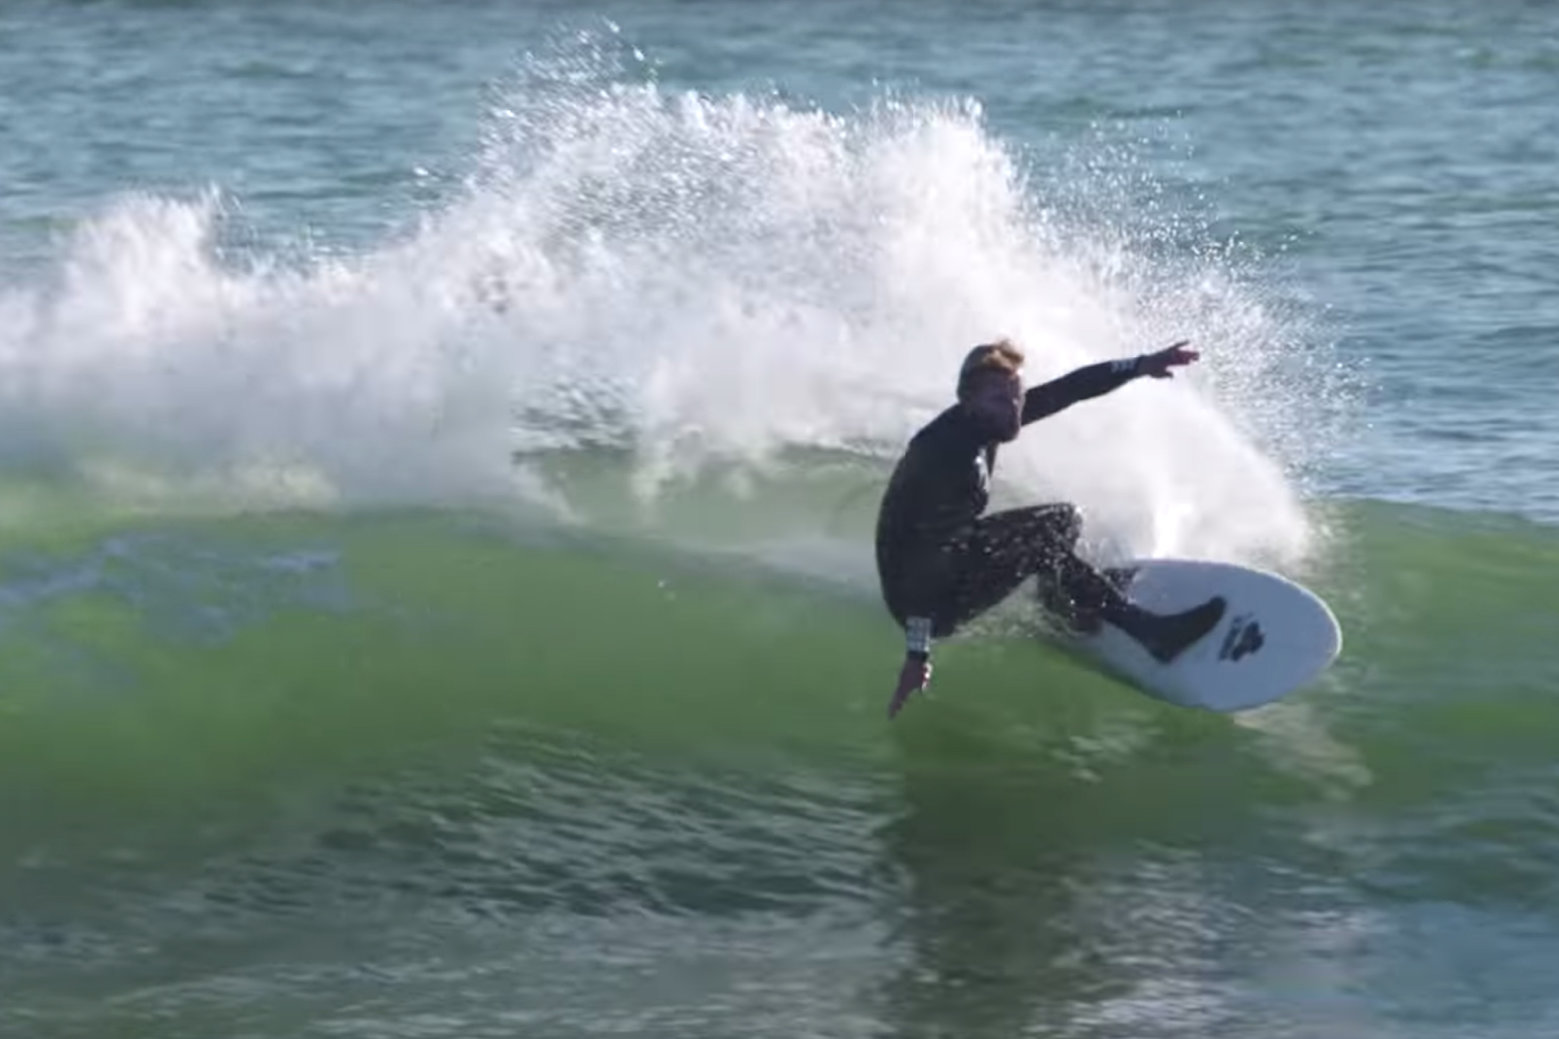 How to Score a Board on Craigslist, With Tanner Gudauskas ...